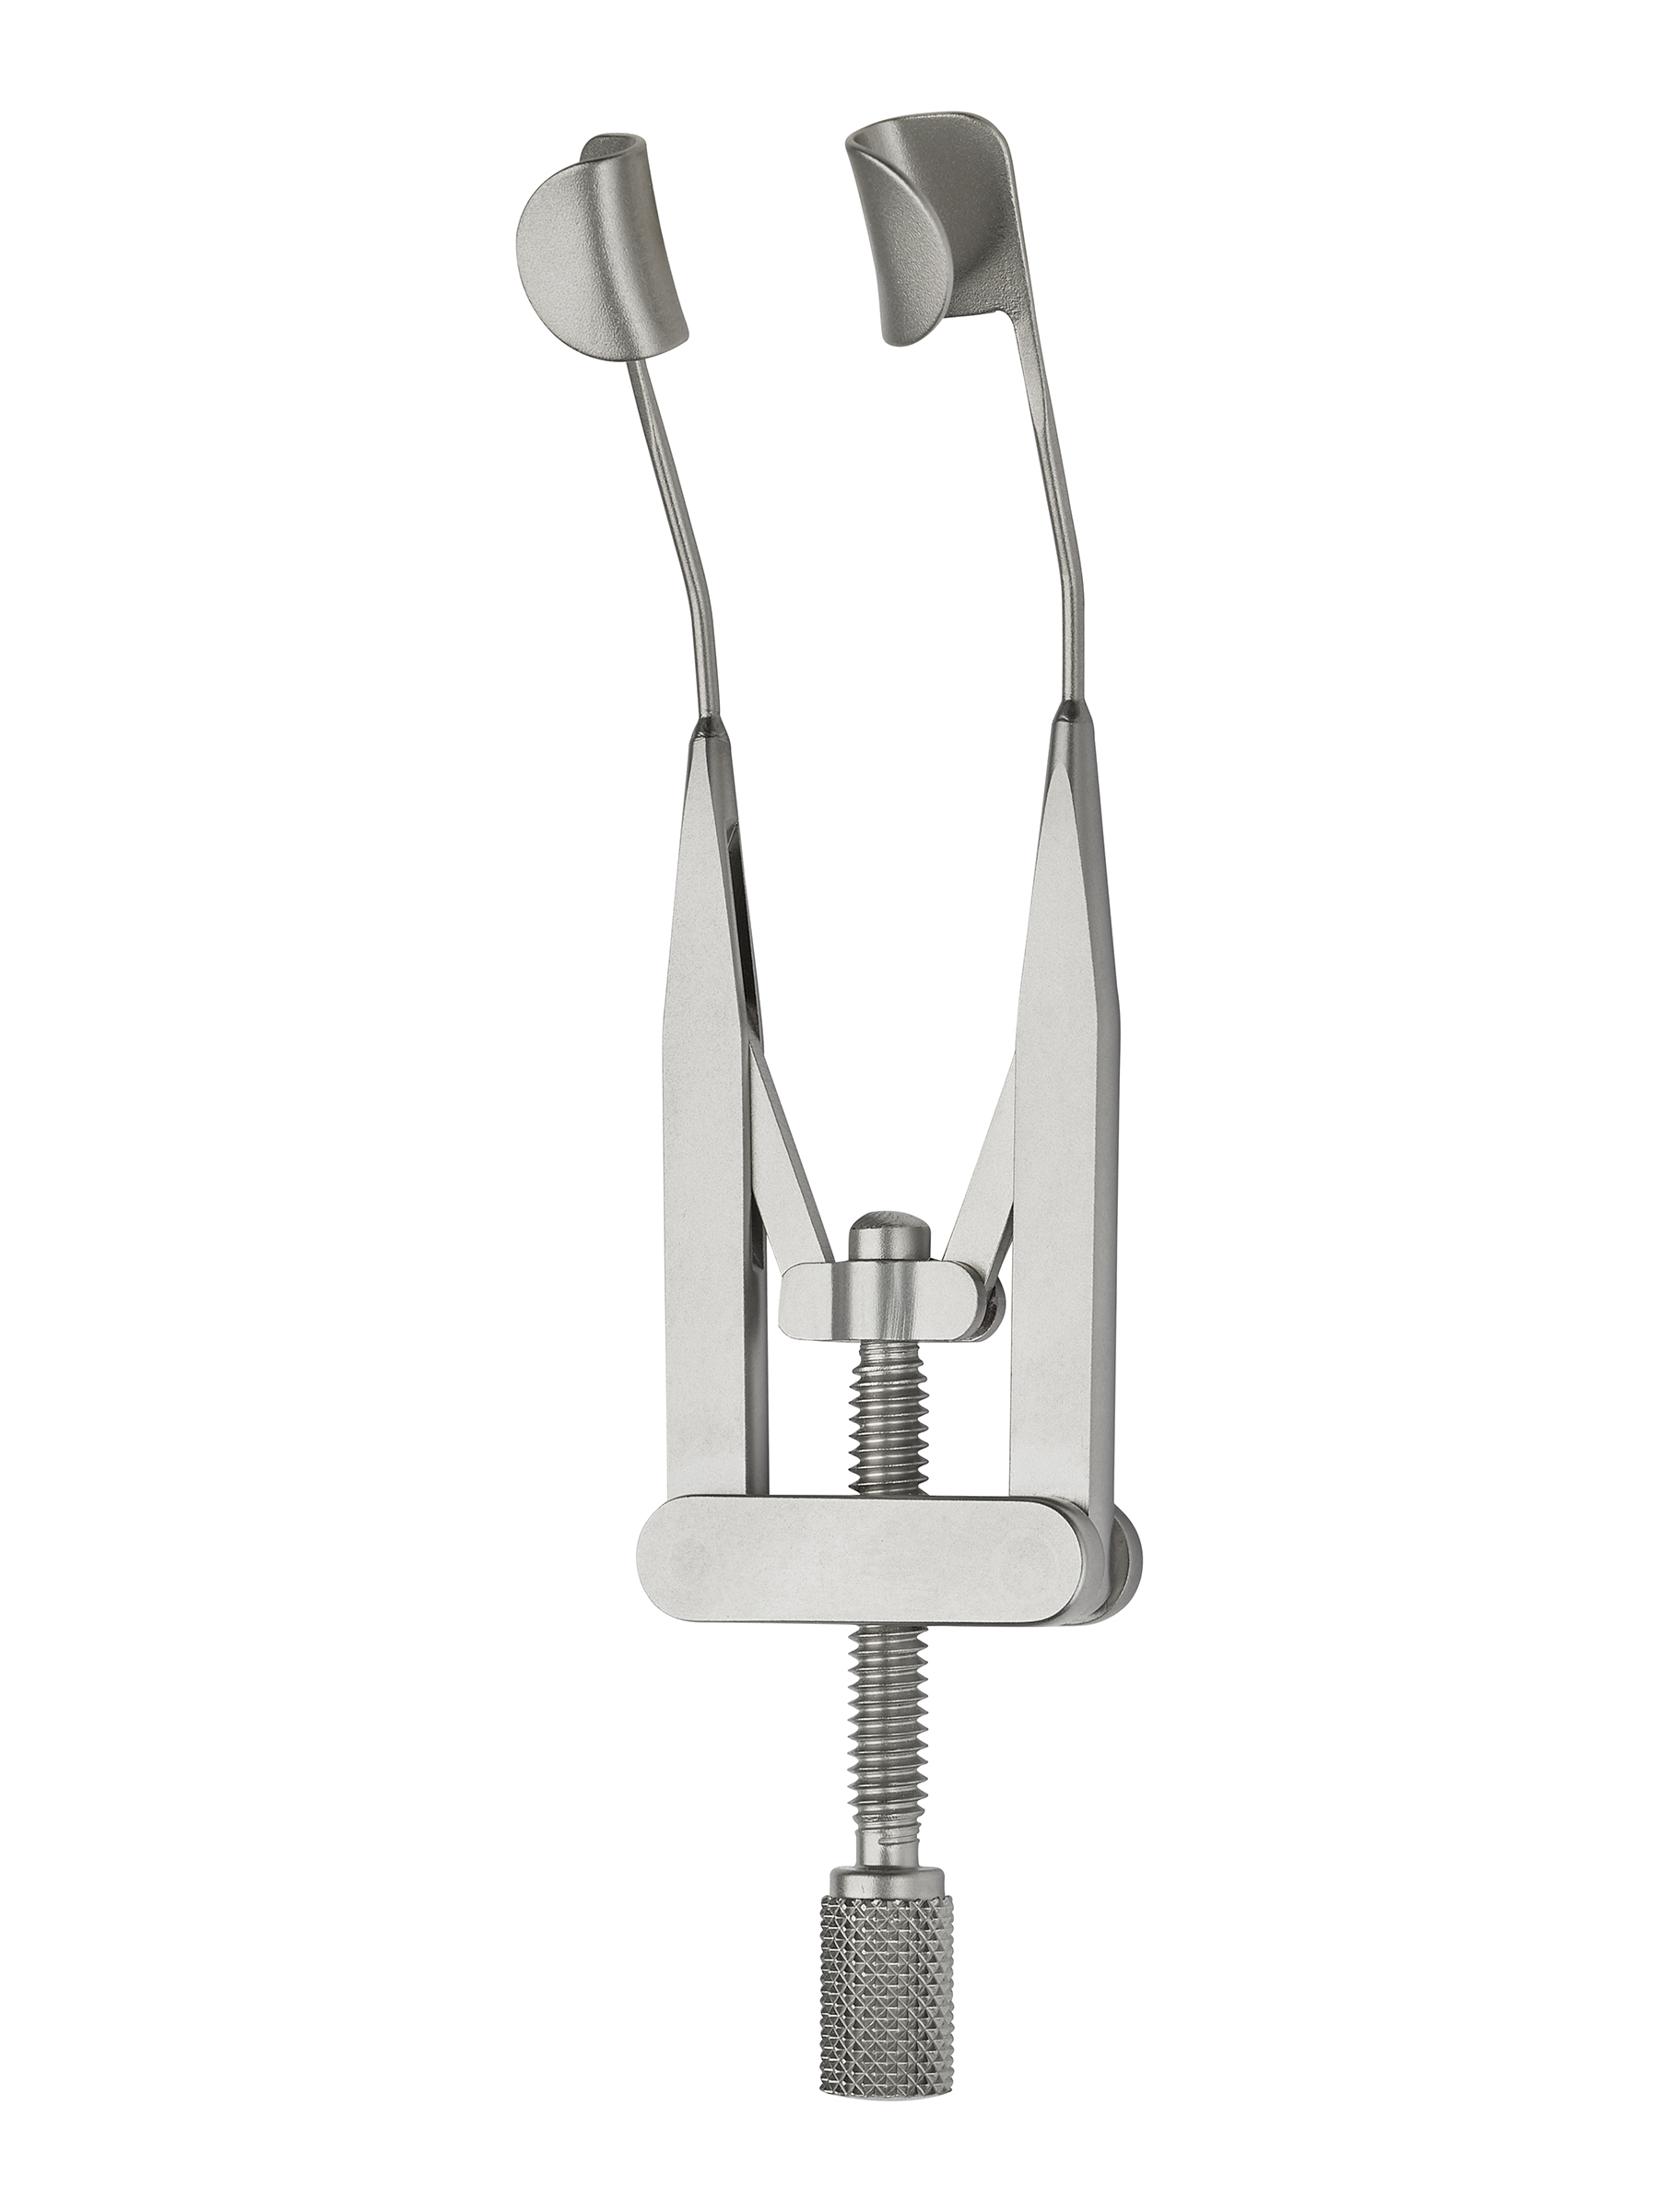 Alm Retractor with Blades